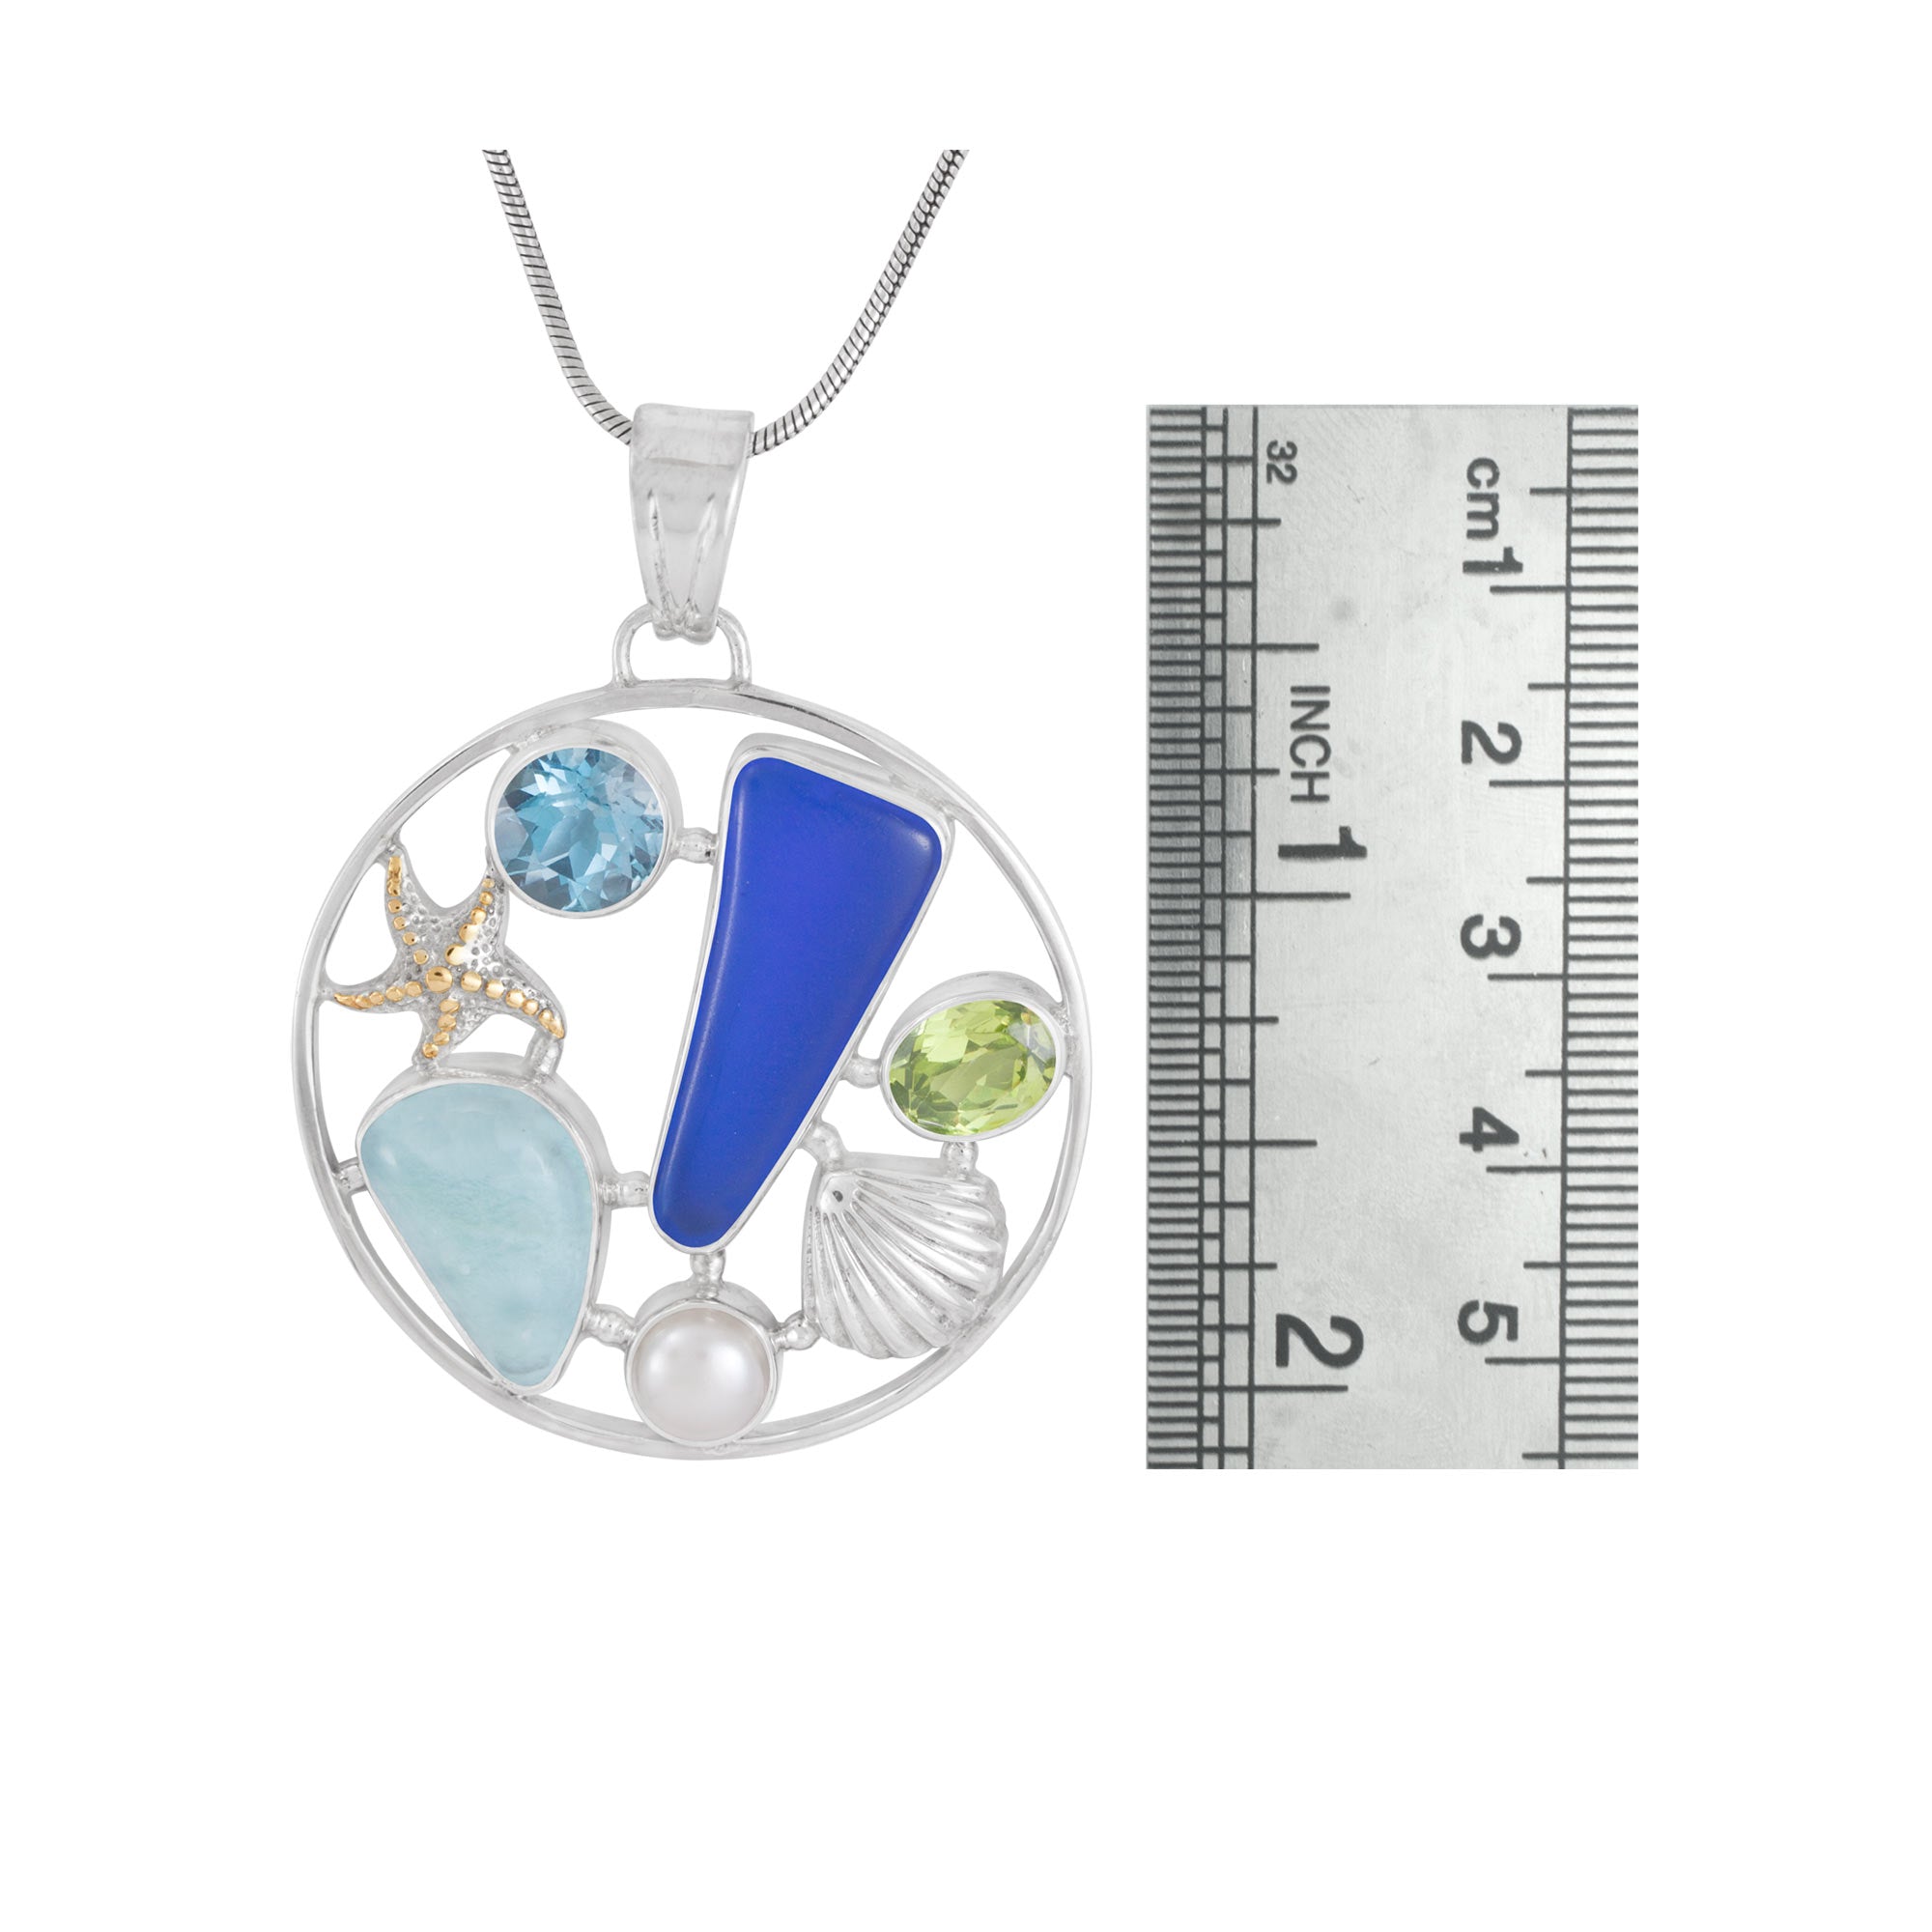 Sterling Silver Pendant With Round Medalion With Sea Glass, Larimar,London Blue & Pearl